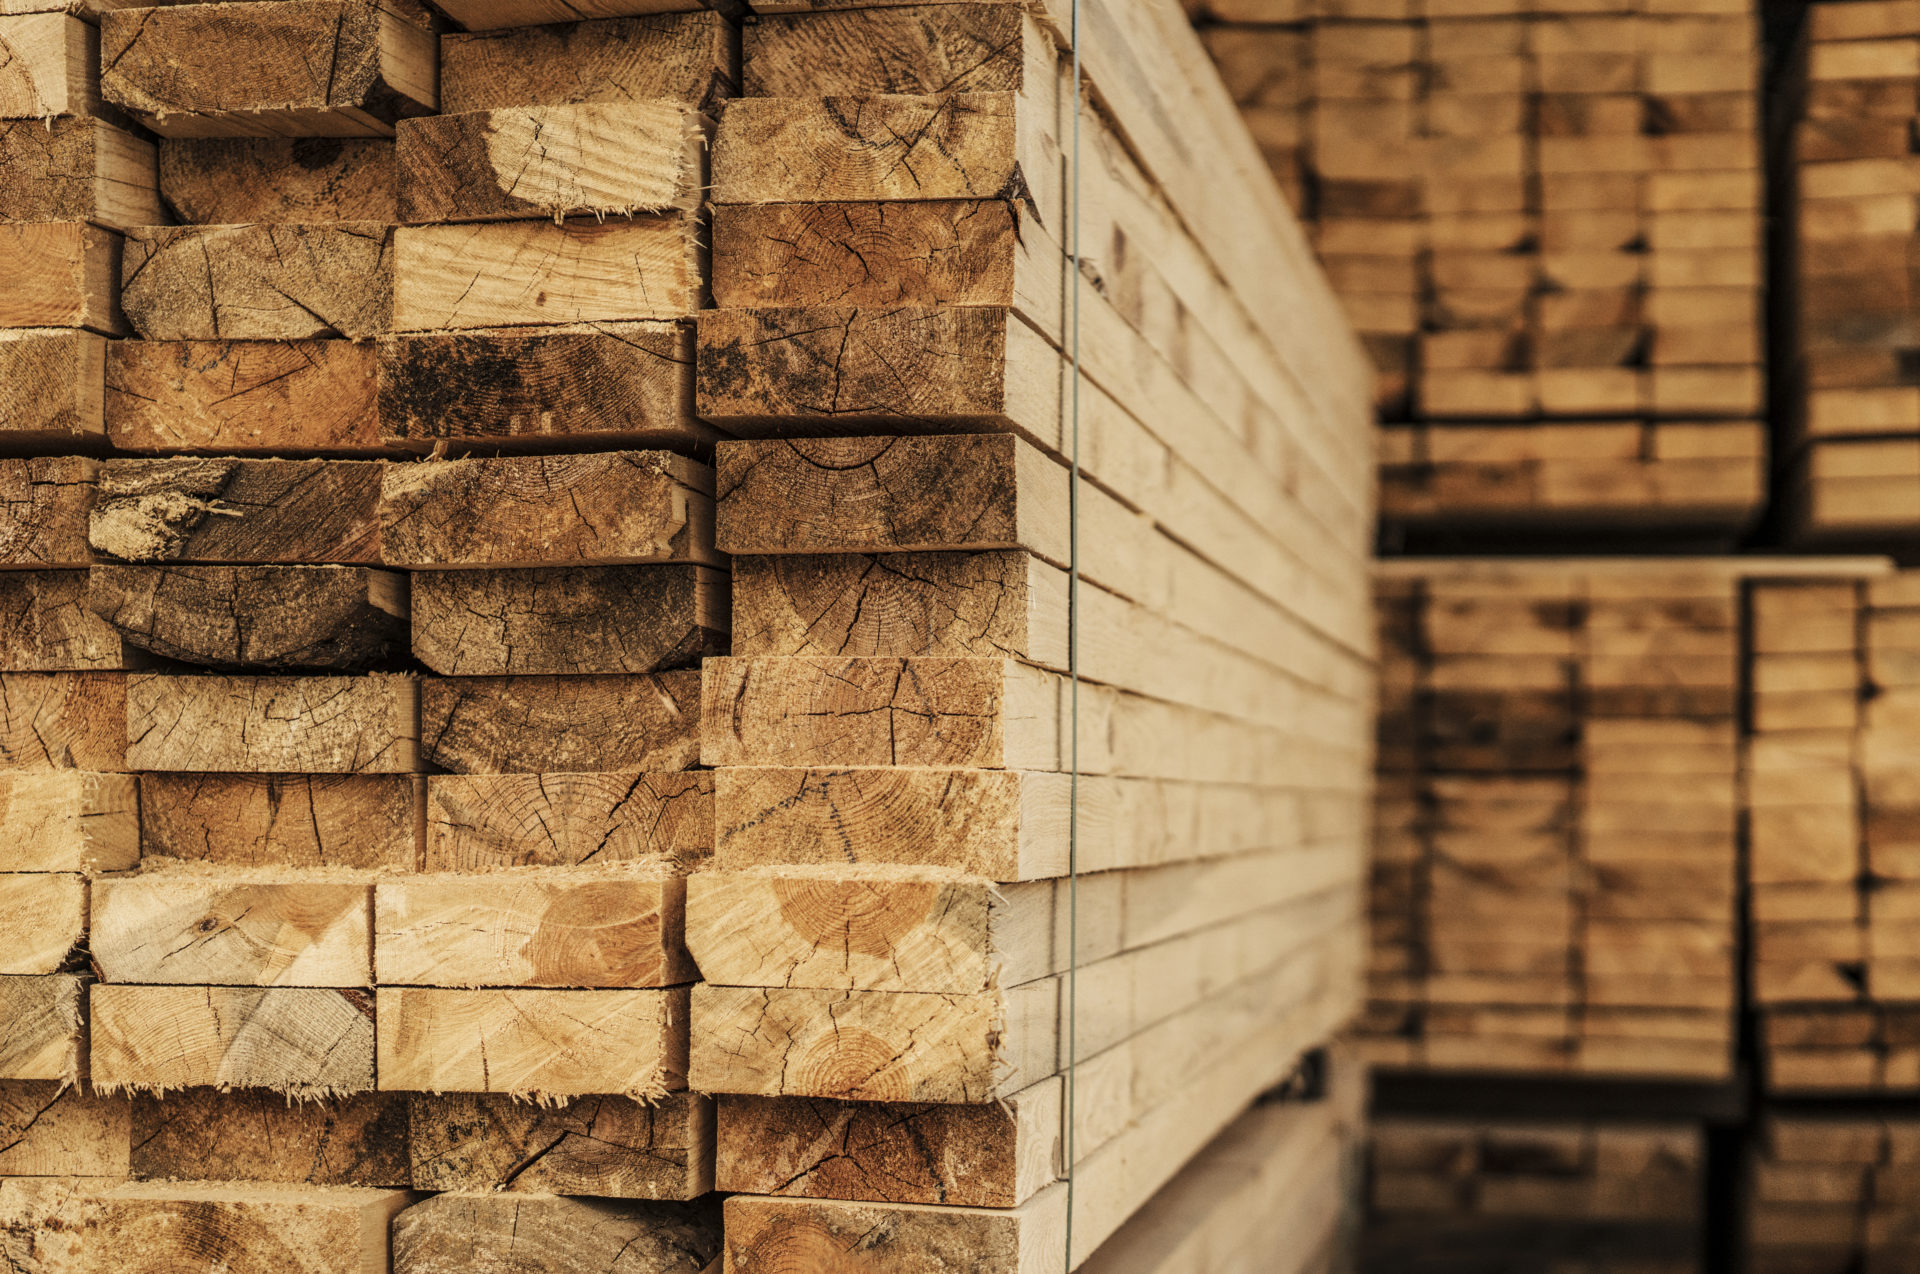 Piles of wood planks in timber yard